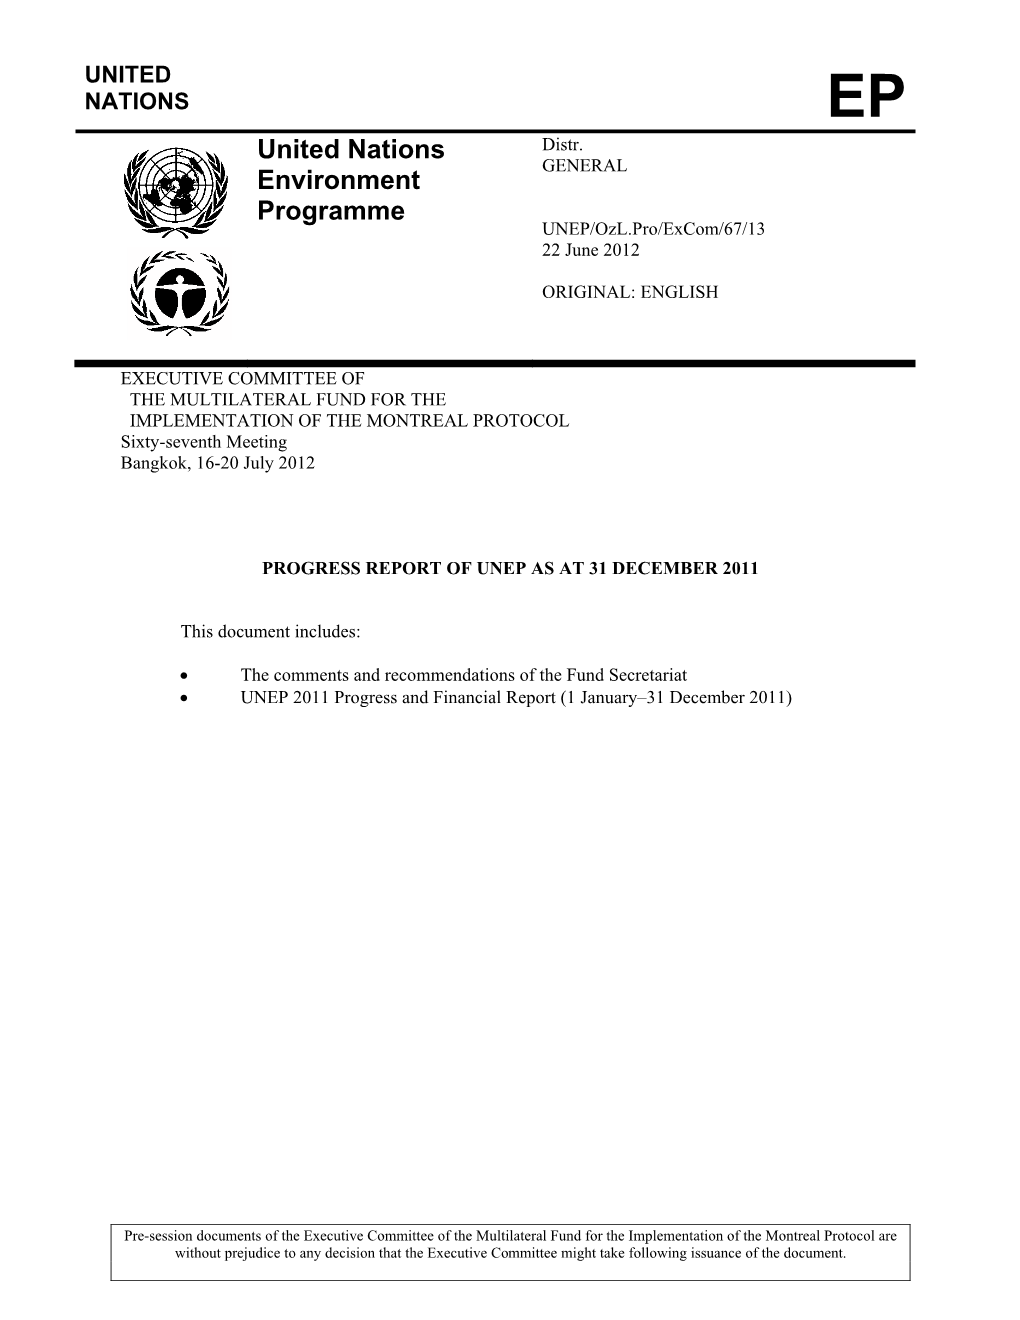 Progress Report of Unep As at 31 December 2011